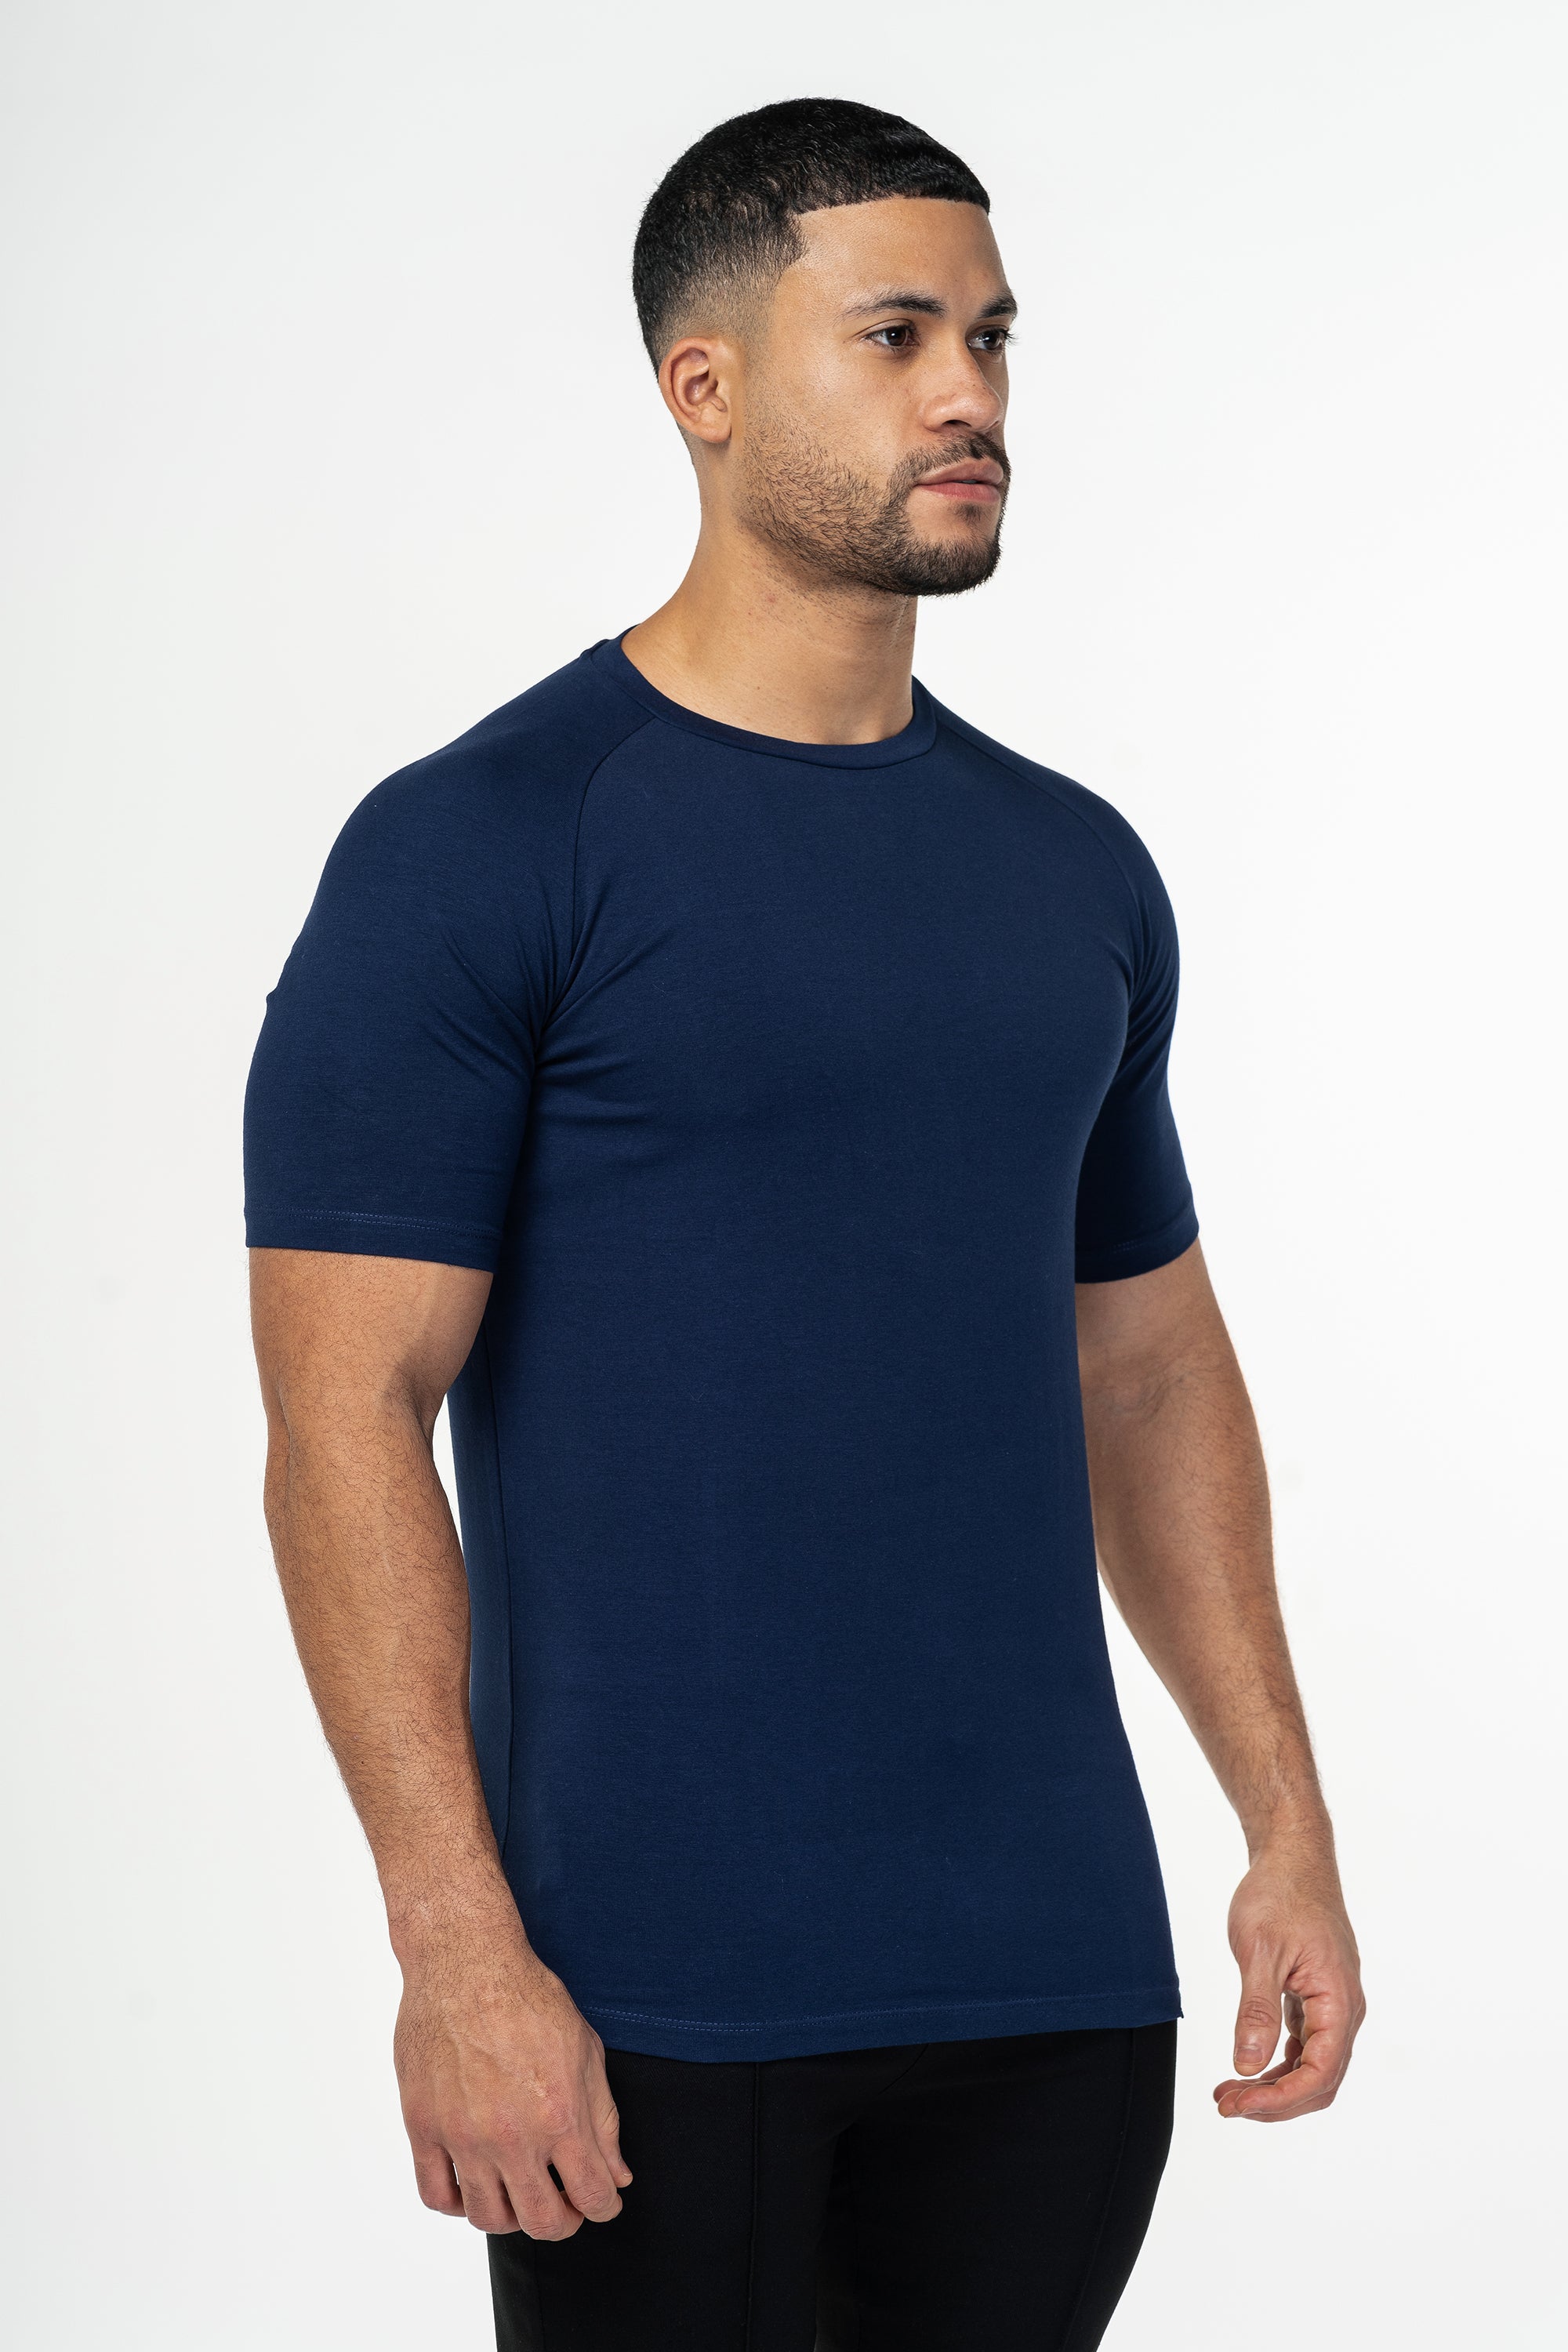 THE MUSCLE BASIC T-SHIRT - BLU SCURO